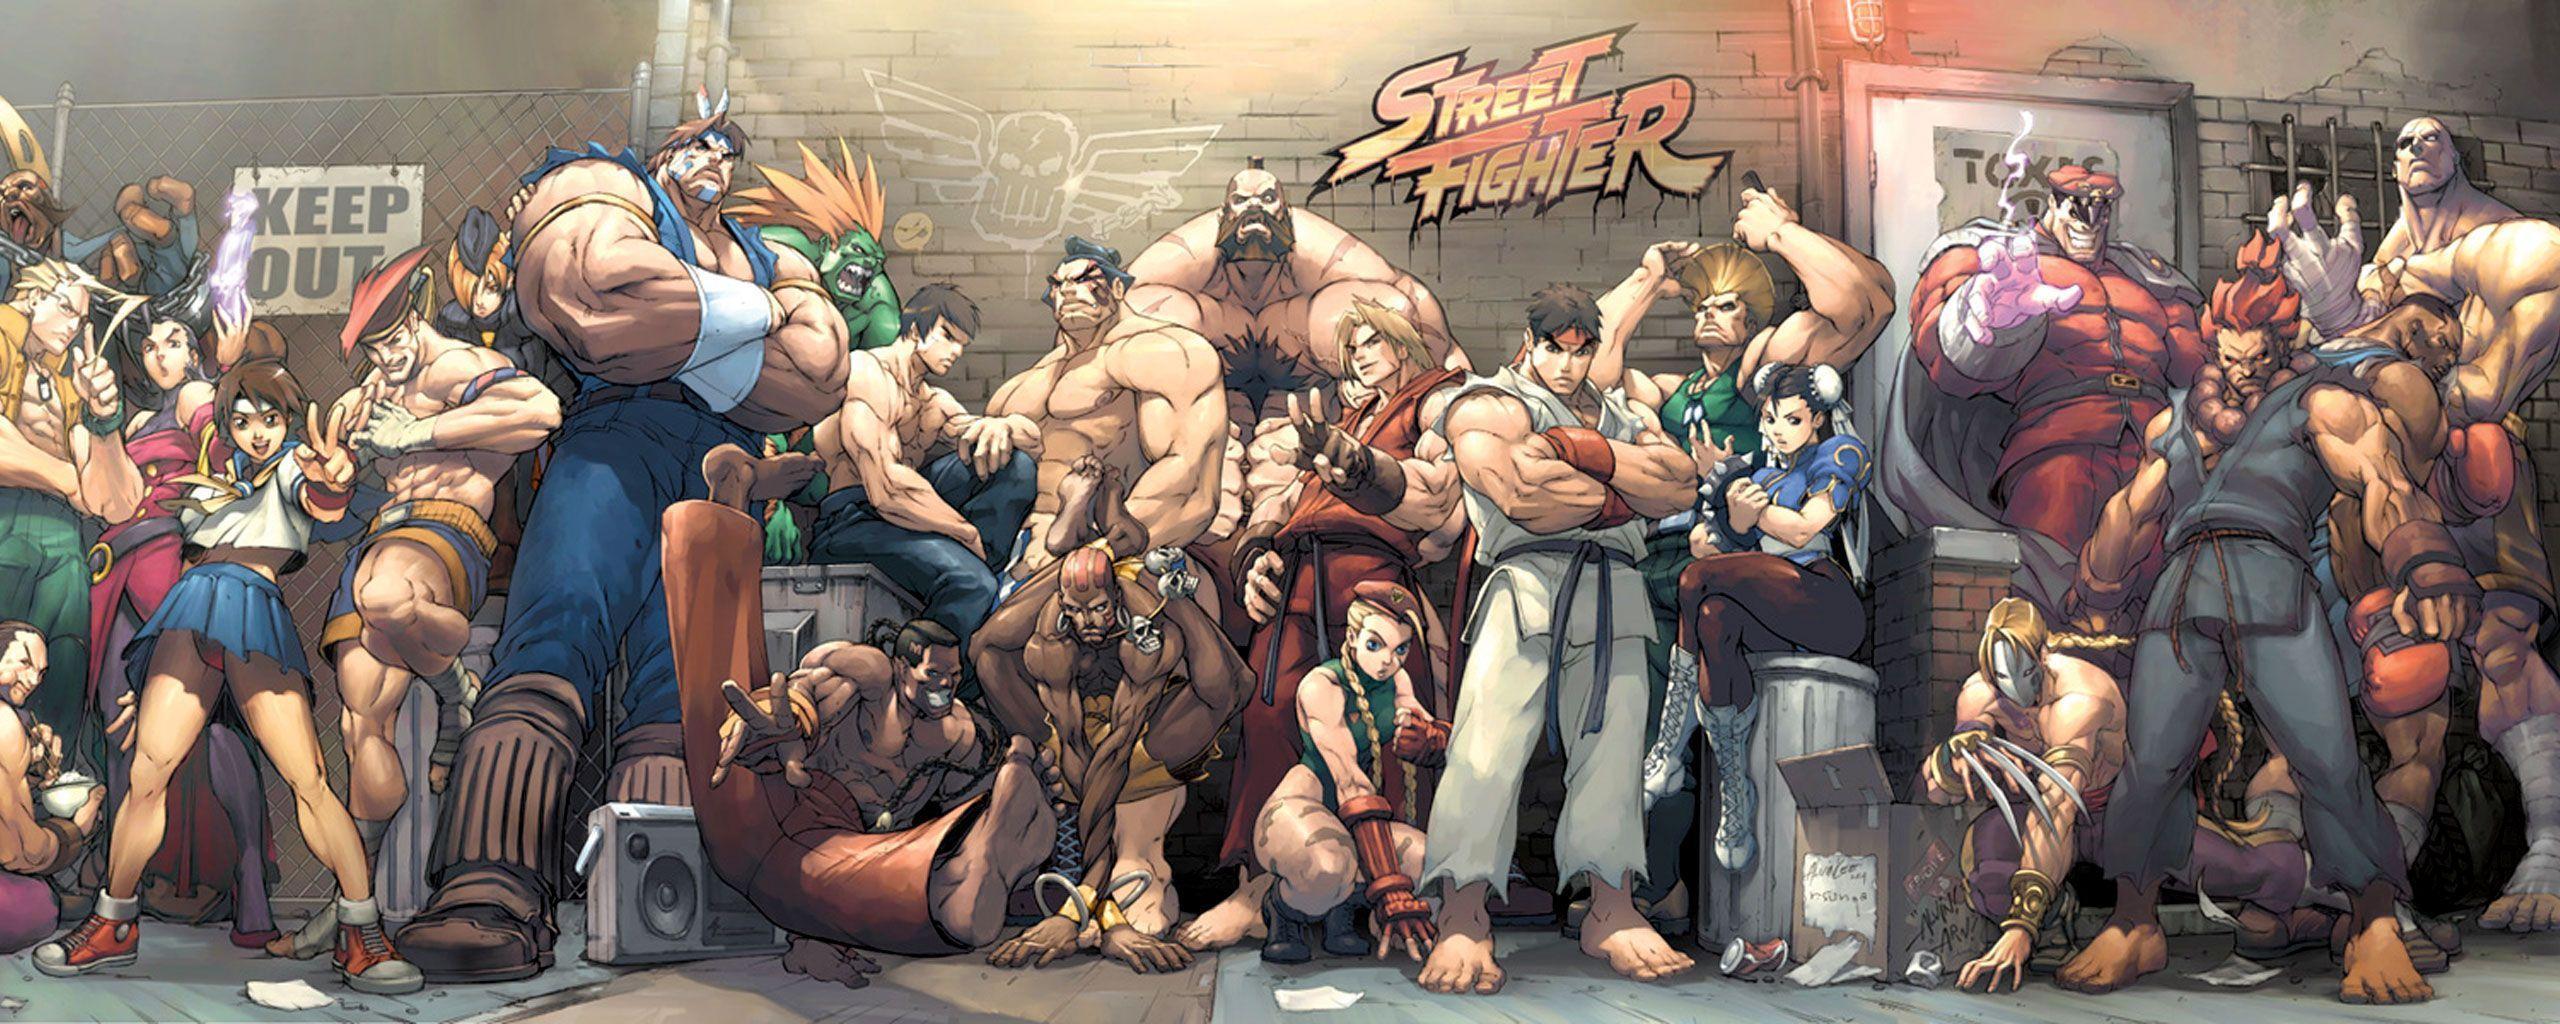 Street Fighter Hd Wallpapers Top Free Street Fighter Hd Backgrounds Wallpaperaccess